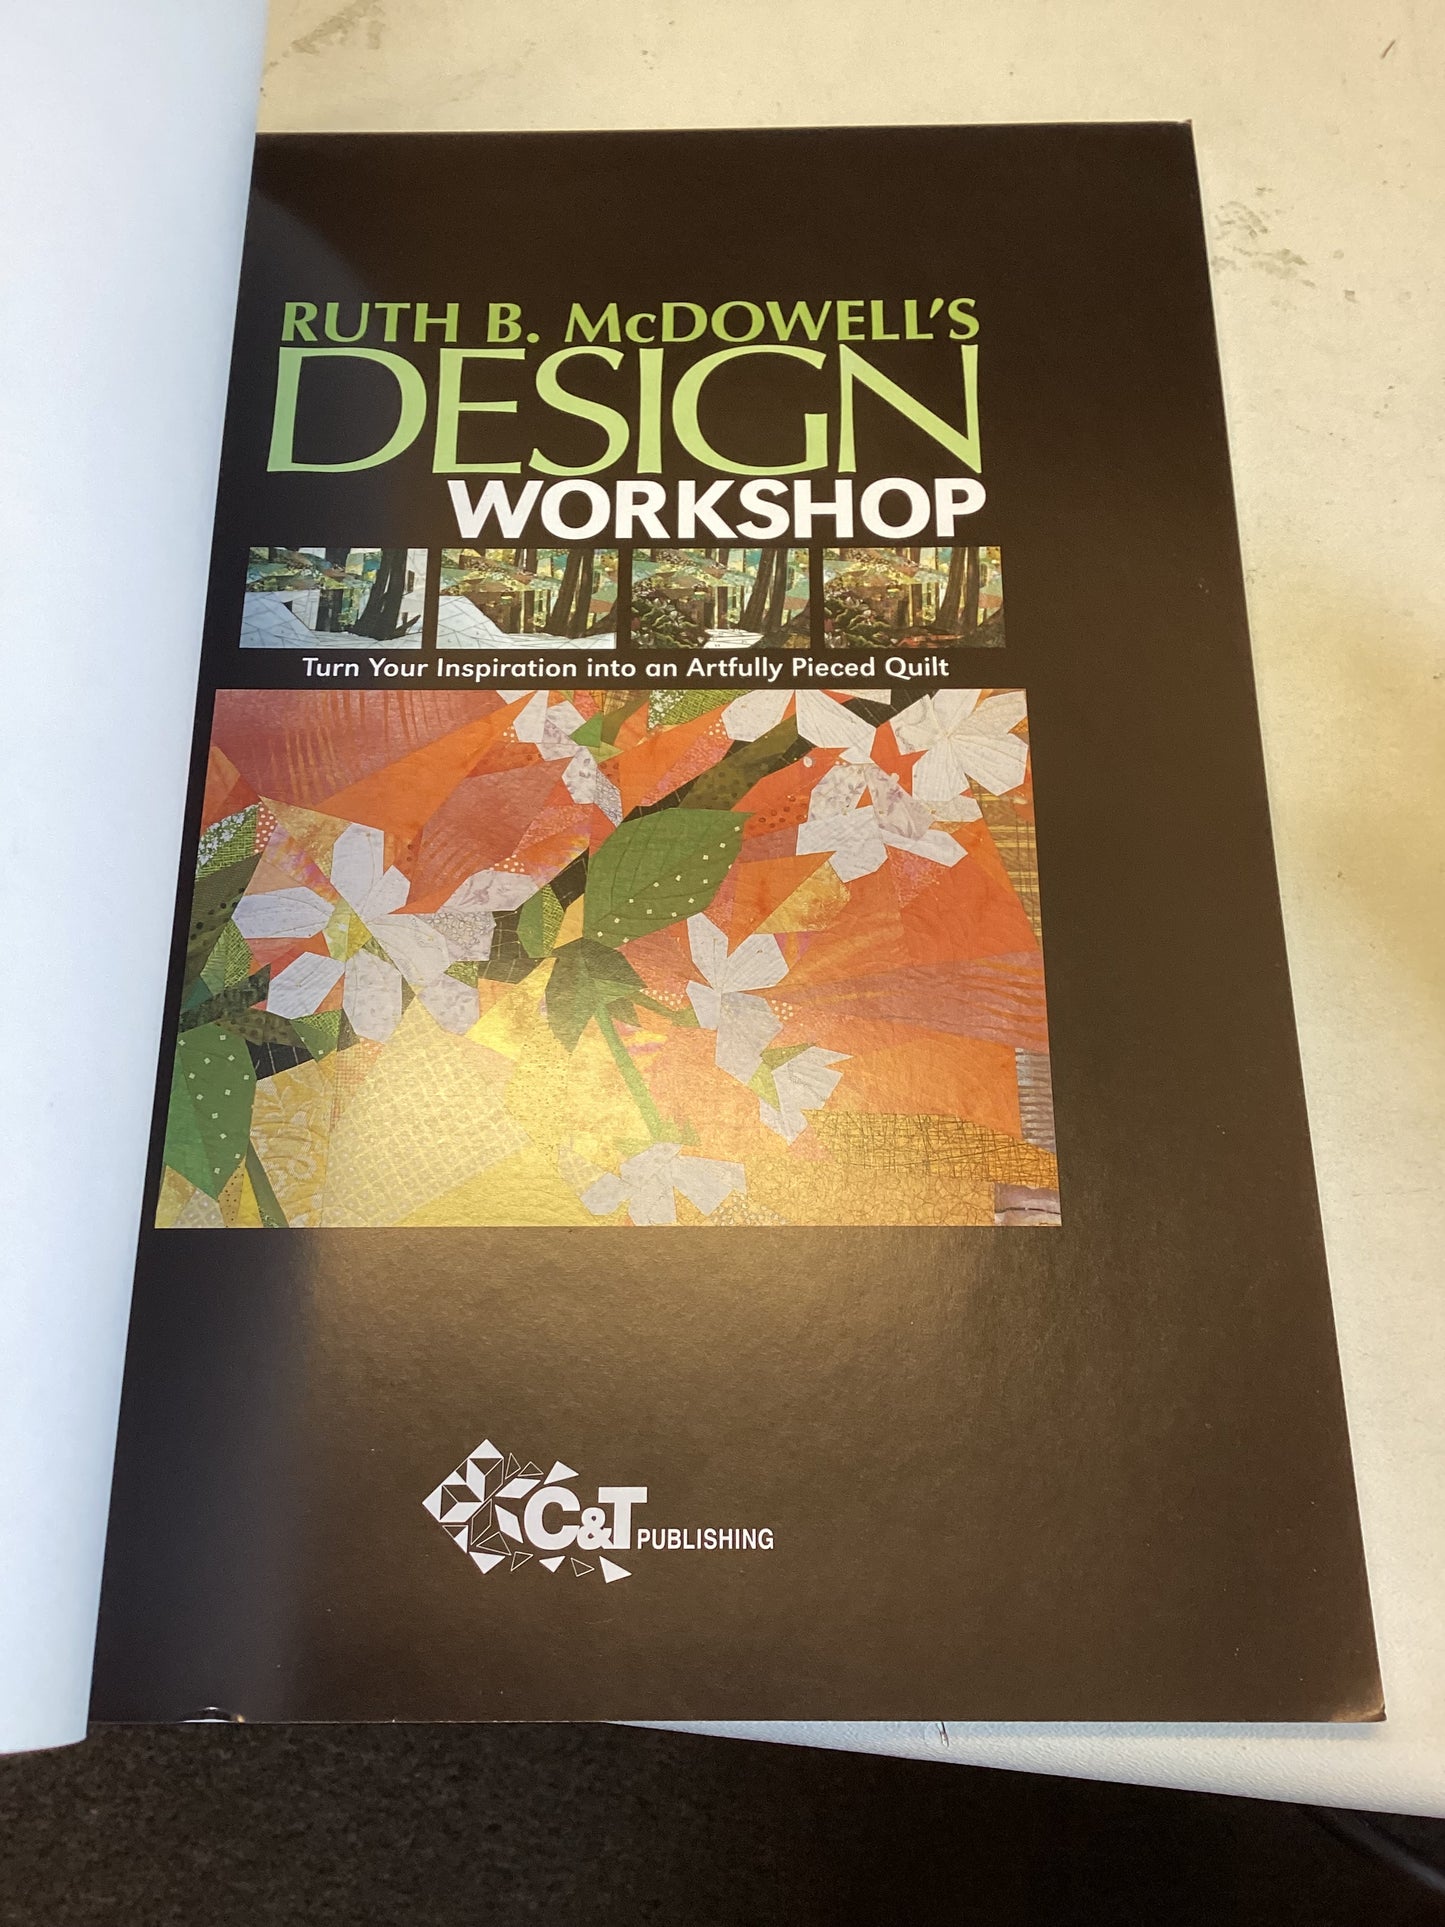 Design Workshop Ruth B McDowell Turn Your Inspiration into an Artfully Pieced Quilt